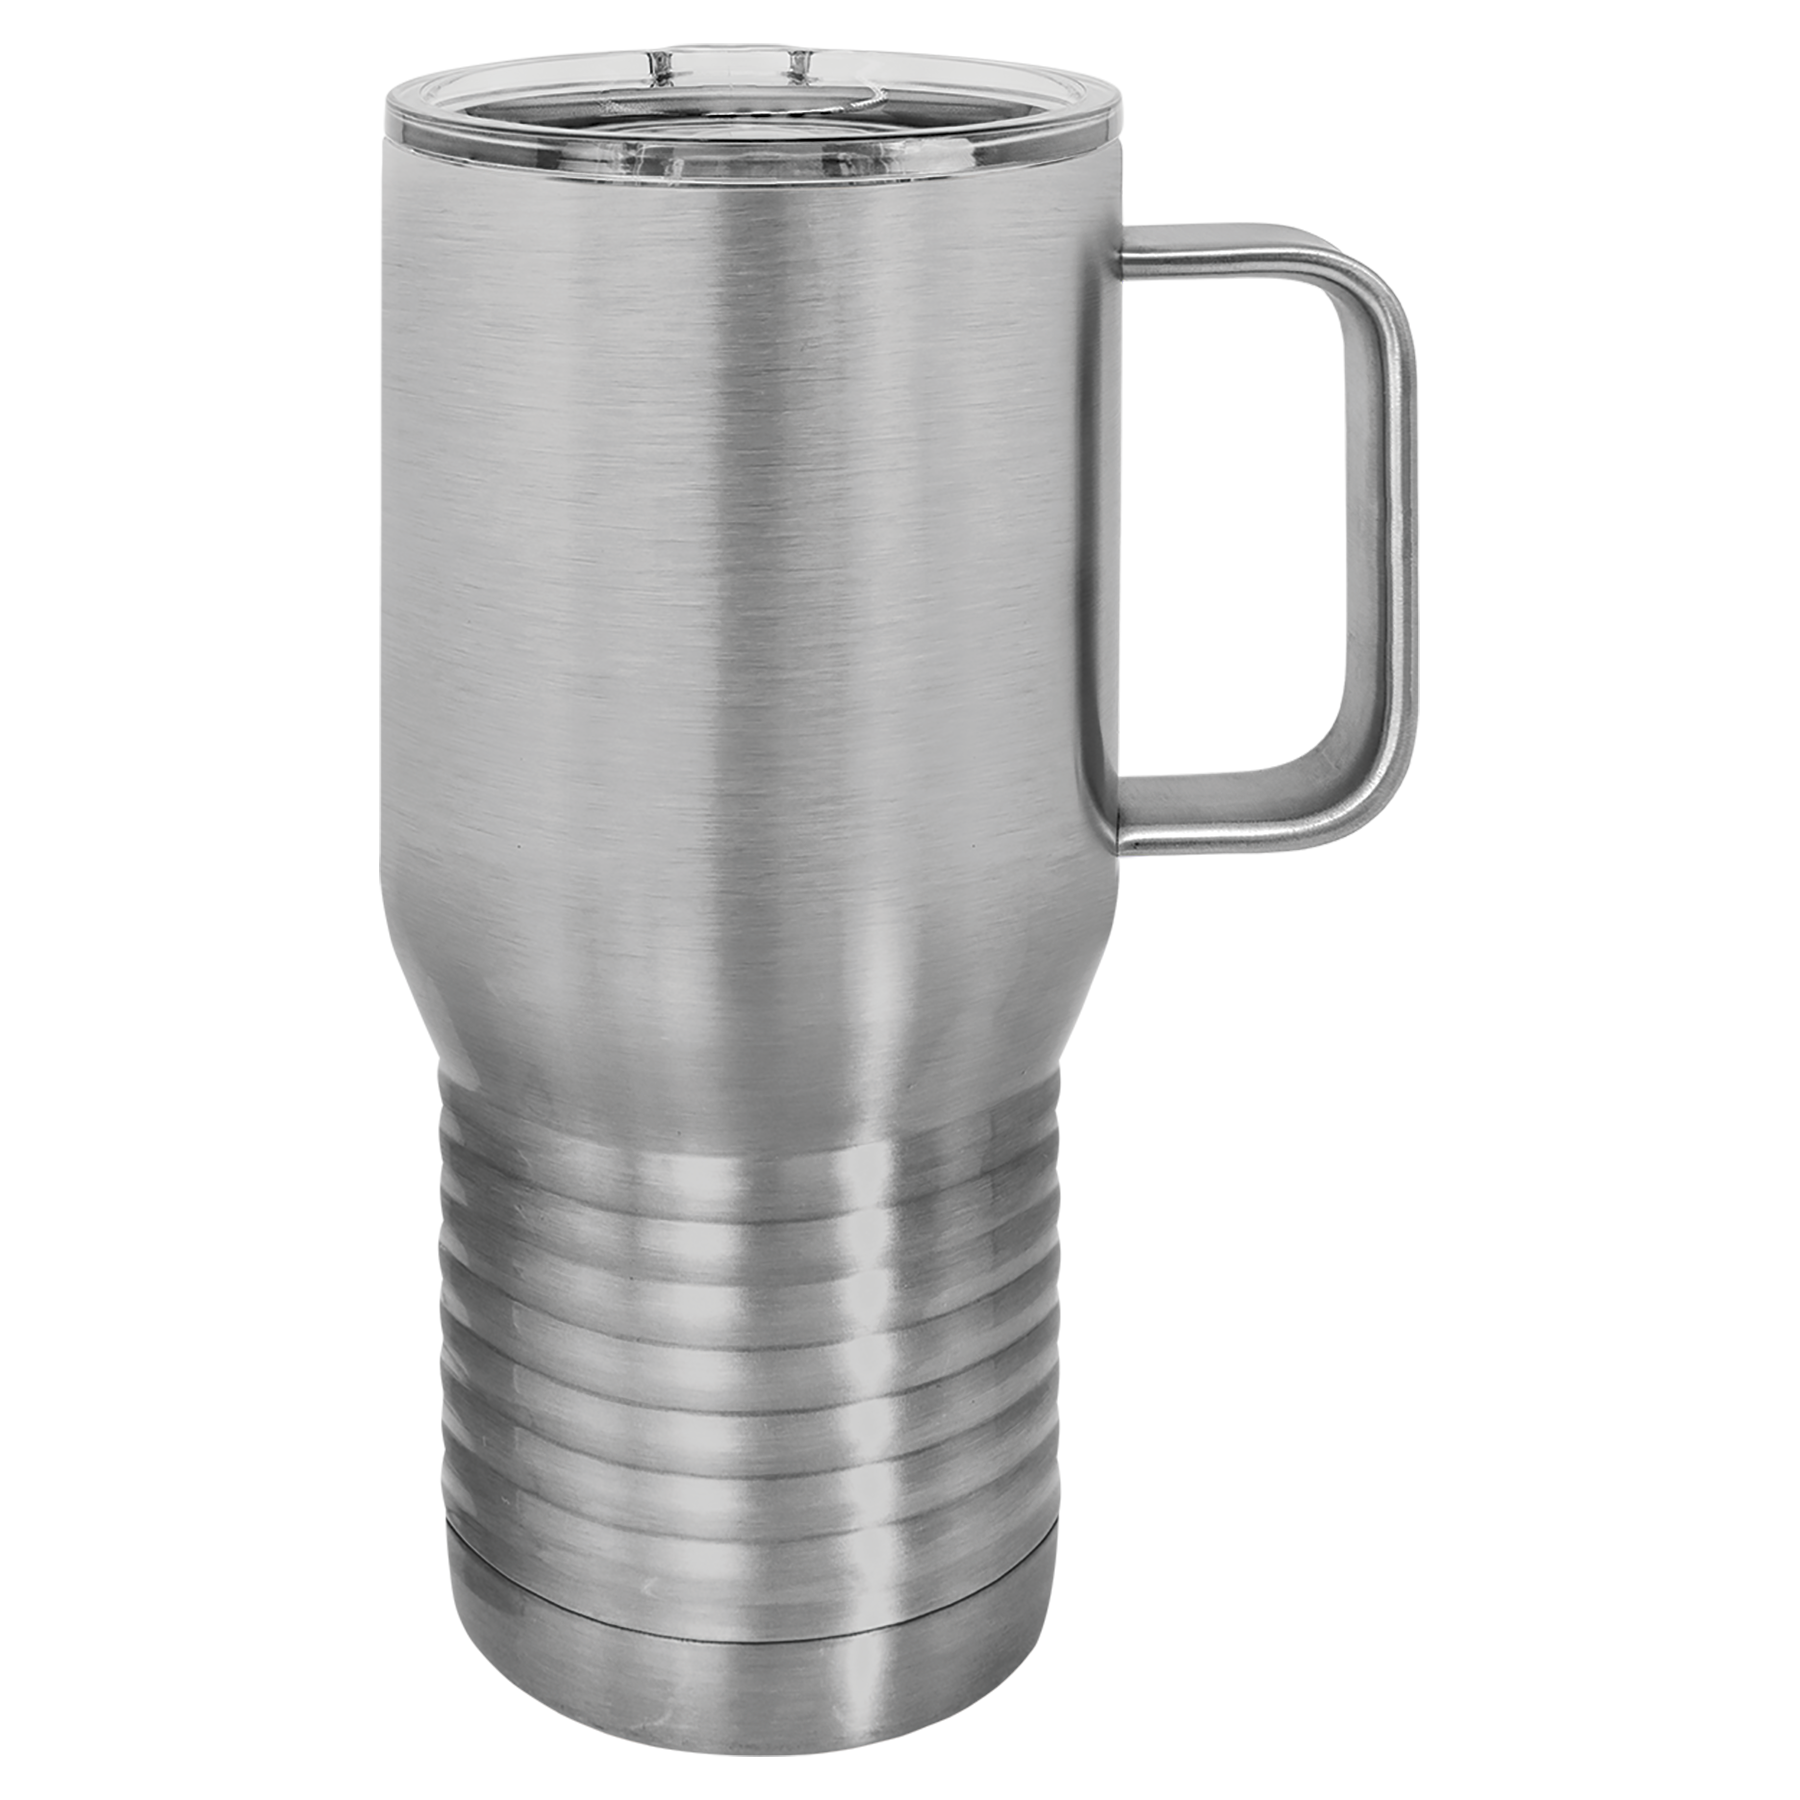 20 OZ STAINLESS STEEL TUMBLER WITH HANDLE - WHITE